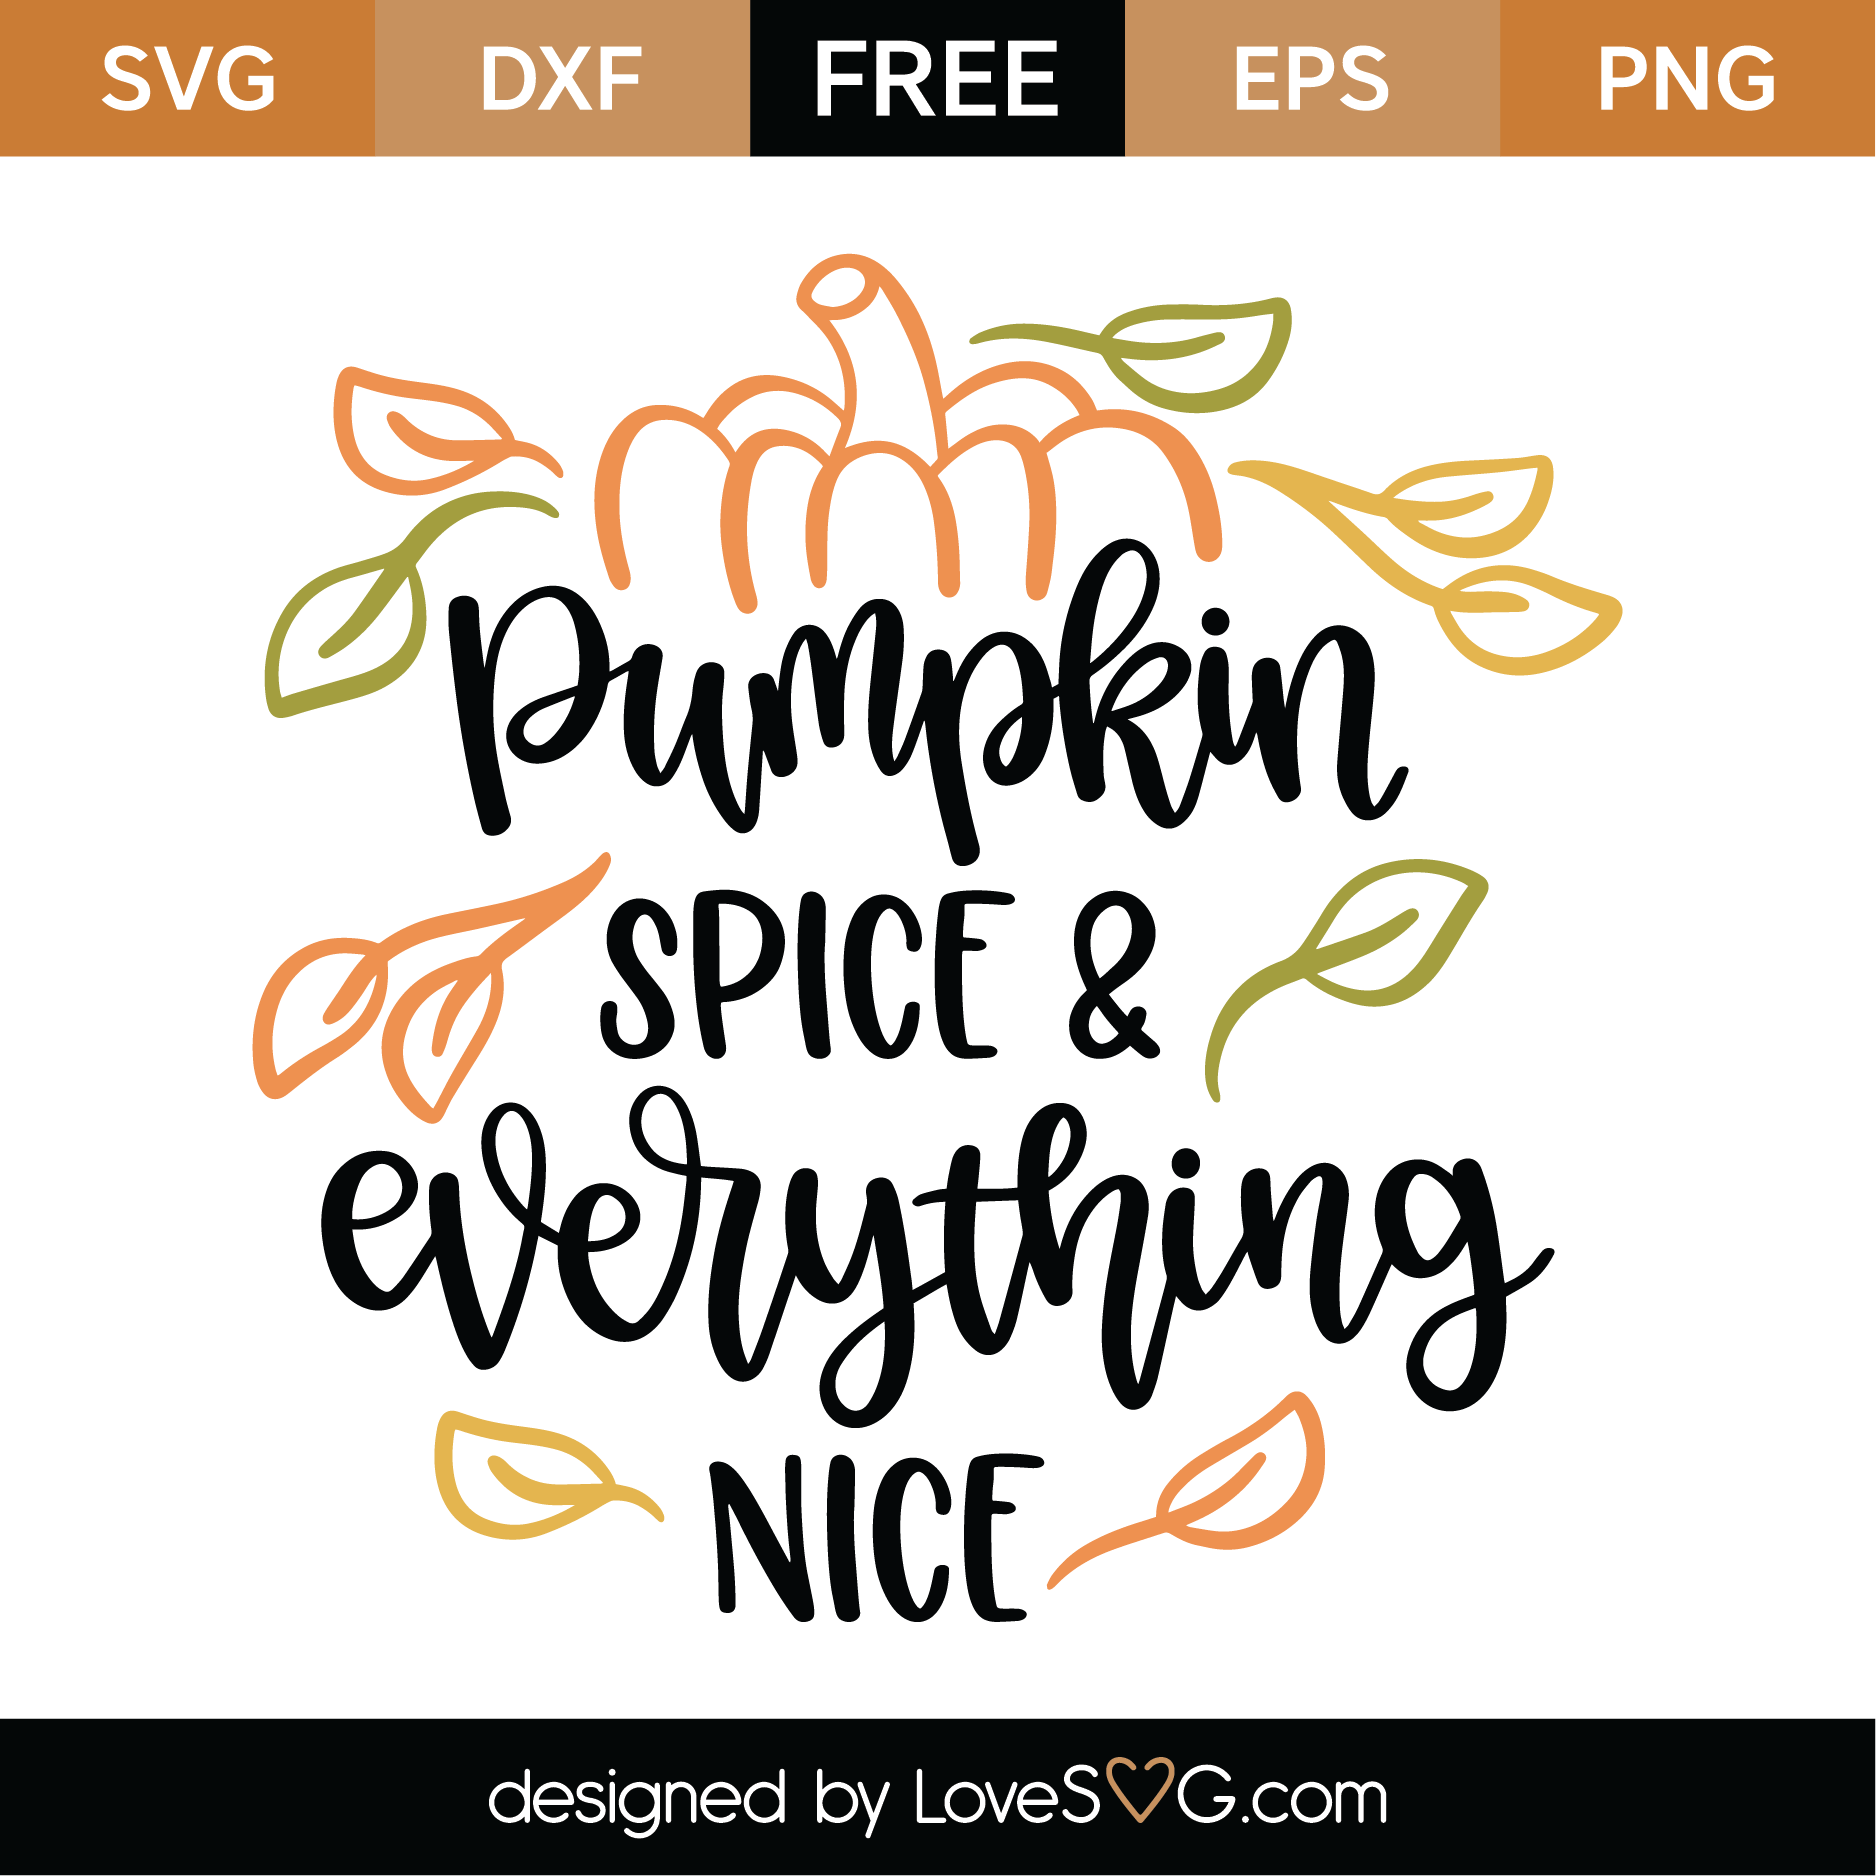 Download Free Pumpkin Spice and Everything Nice SVG Cut File ...